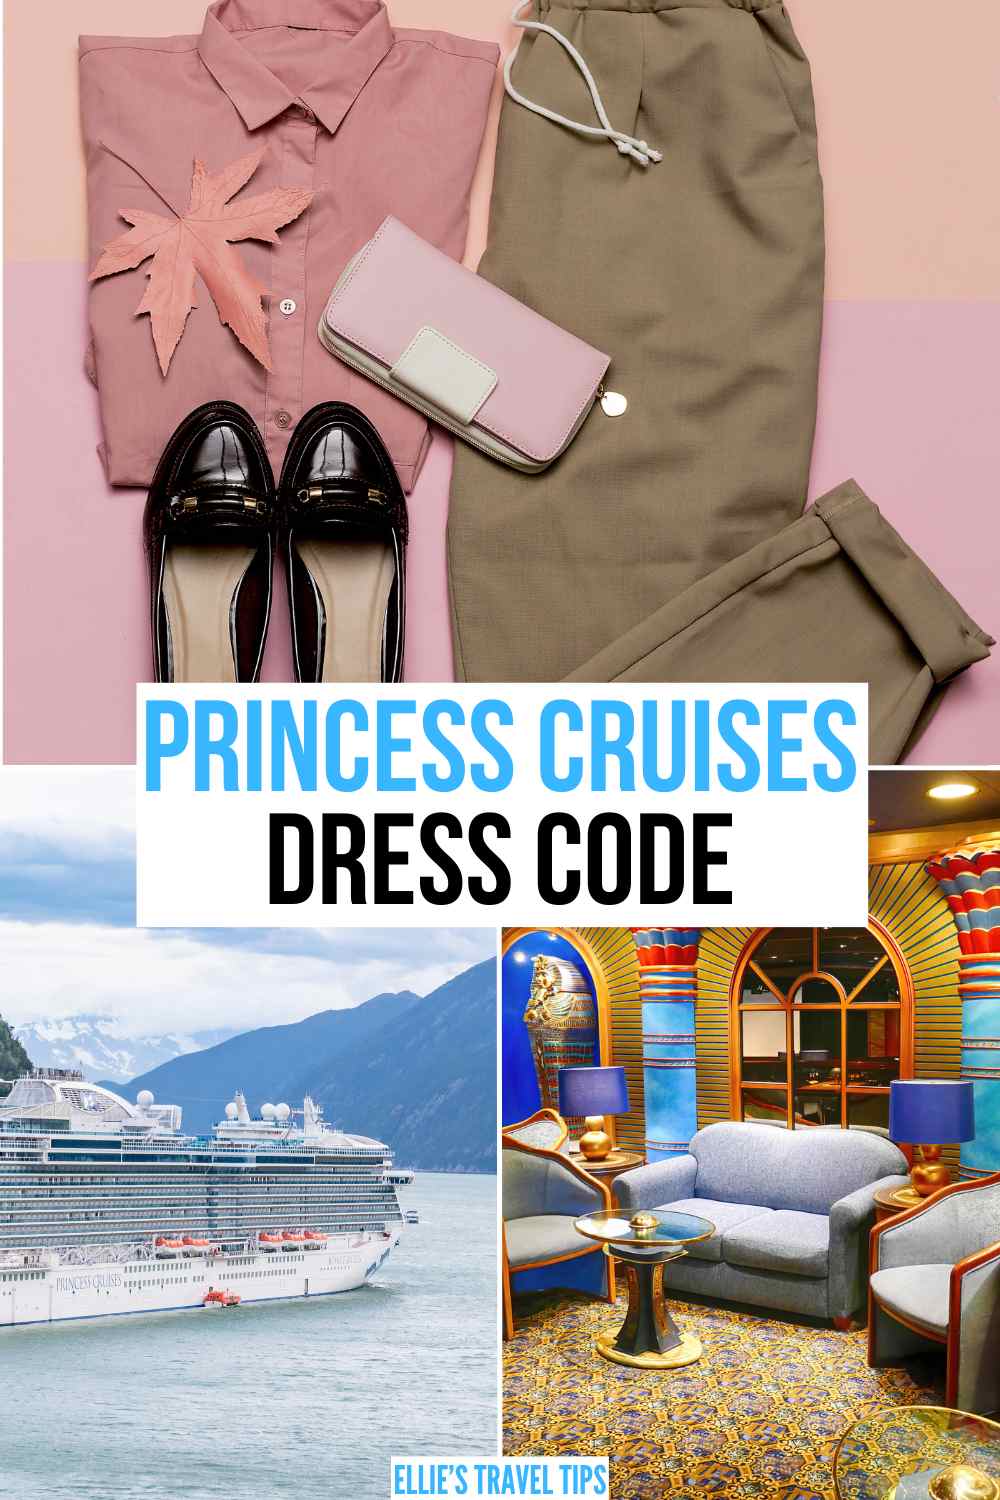 What Should I Wear on a Cruise? A Guide to Cruise Line Dress Codes